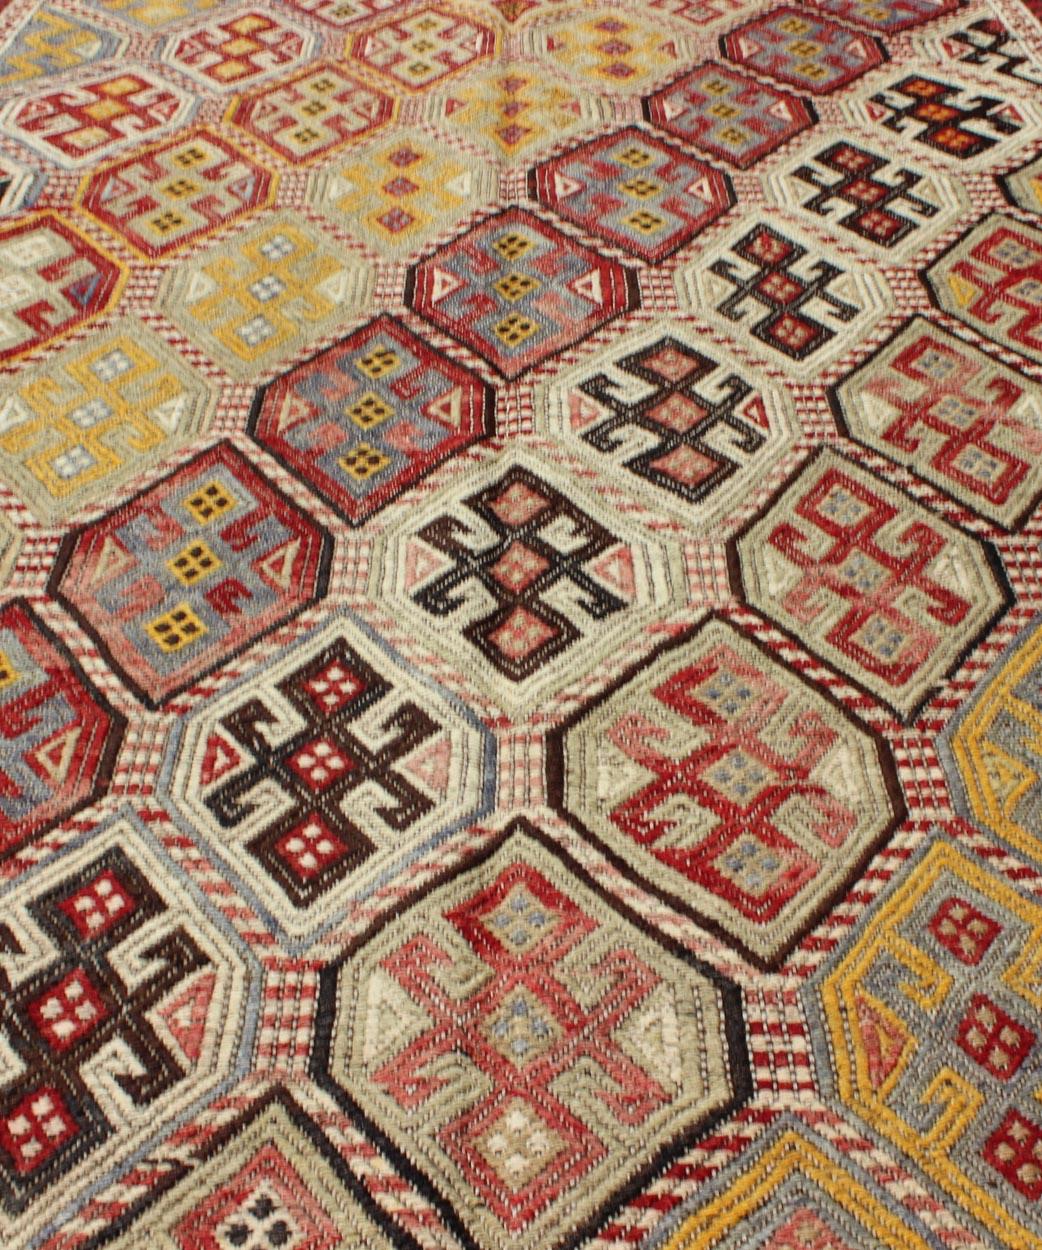 Hand-Knotted Unique Turkish Kilim Rug with Multi-Colored Diamond Geometric Shapes